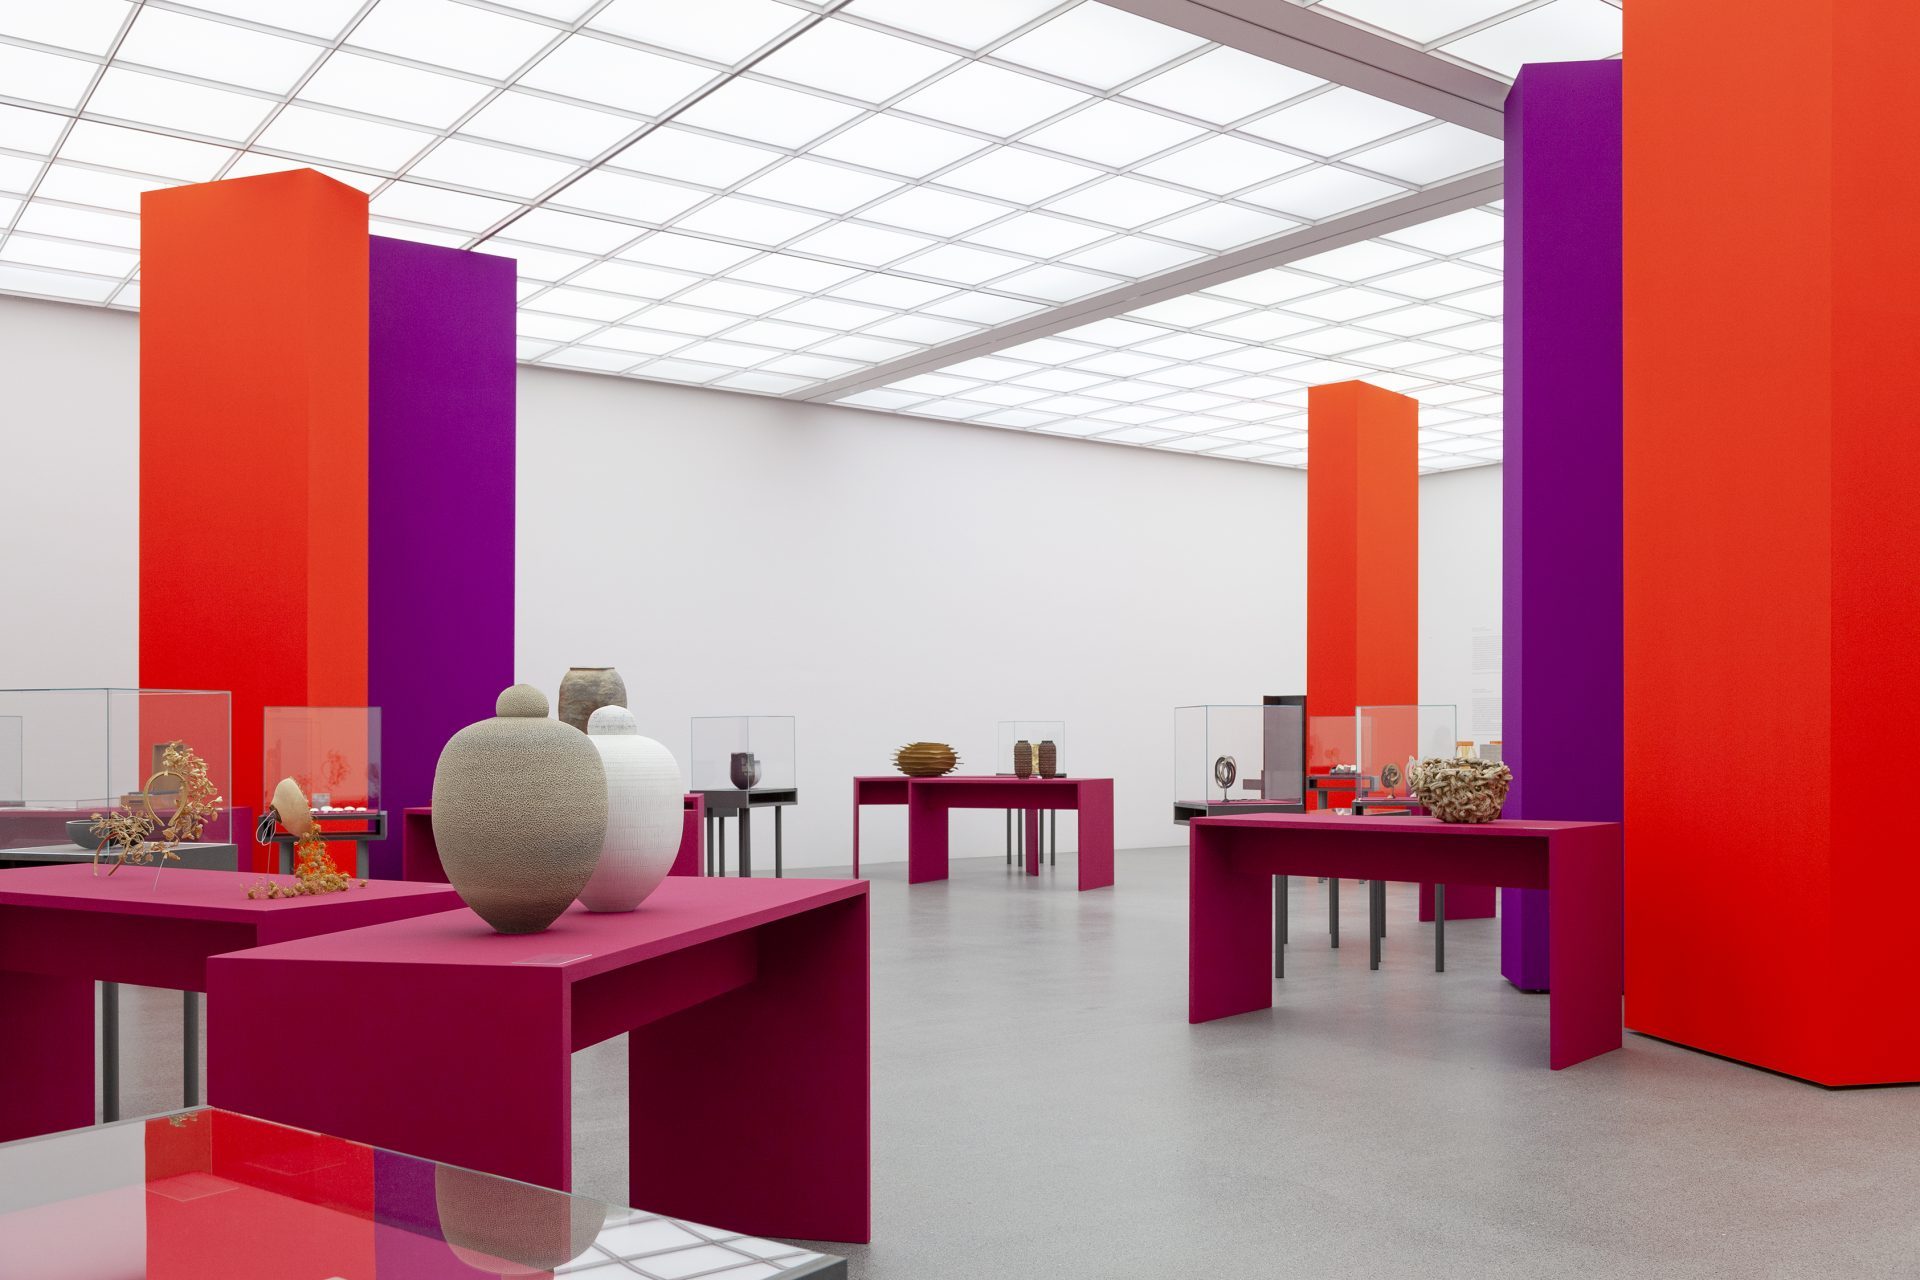 View of the exhibition "Danner Prize 2020. 100 years of the Danner Foundation", red and purple columns in the room, the objects are displayed on pink pedestals/showcases.